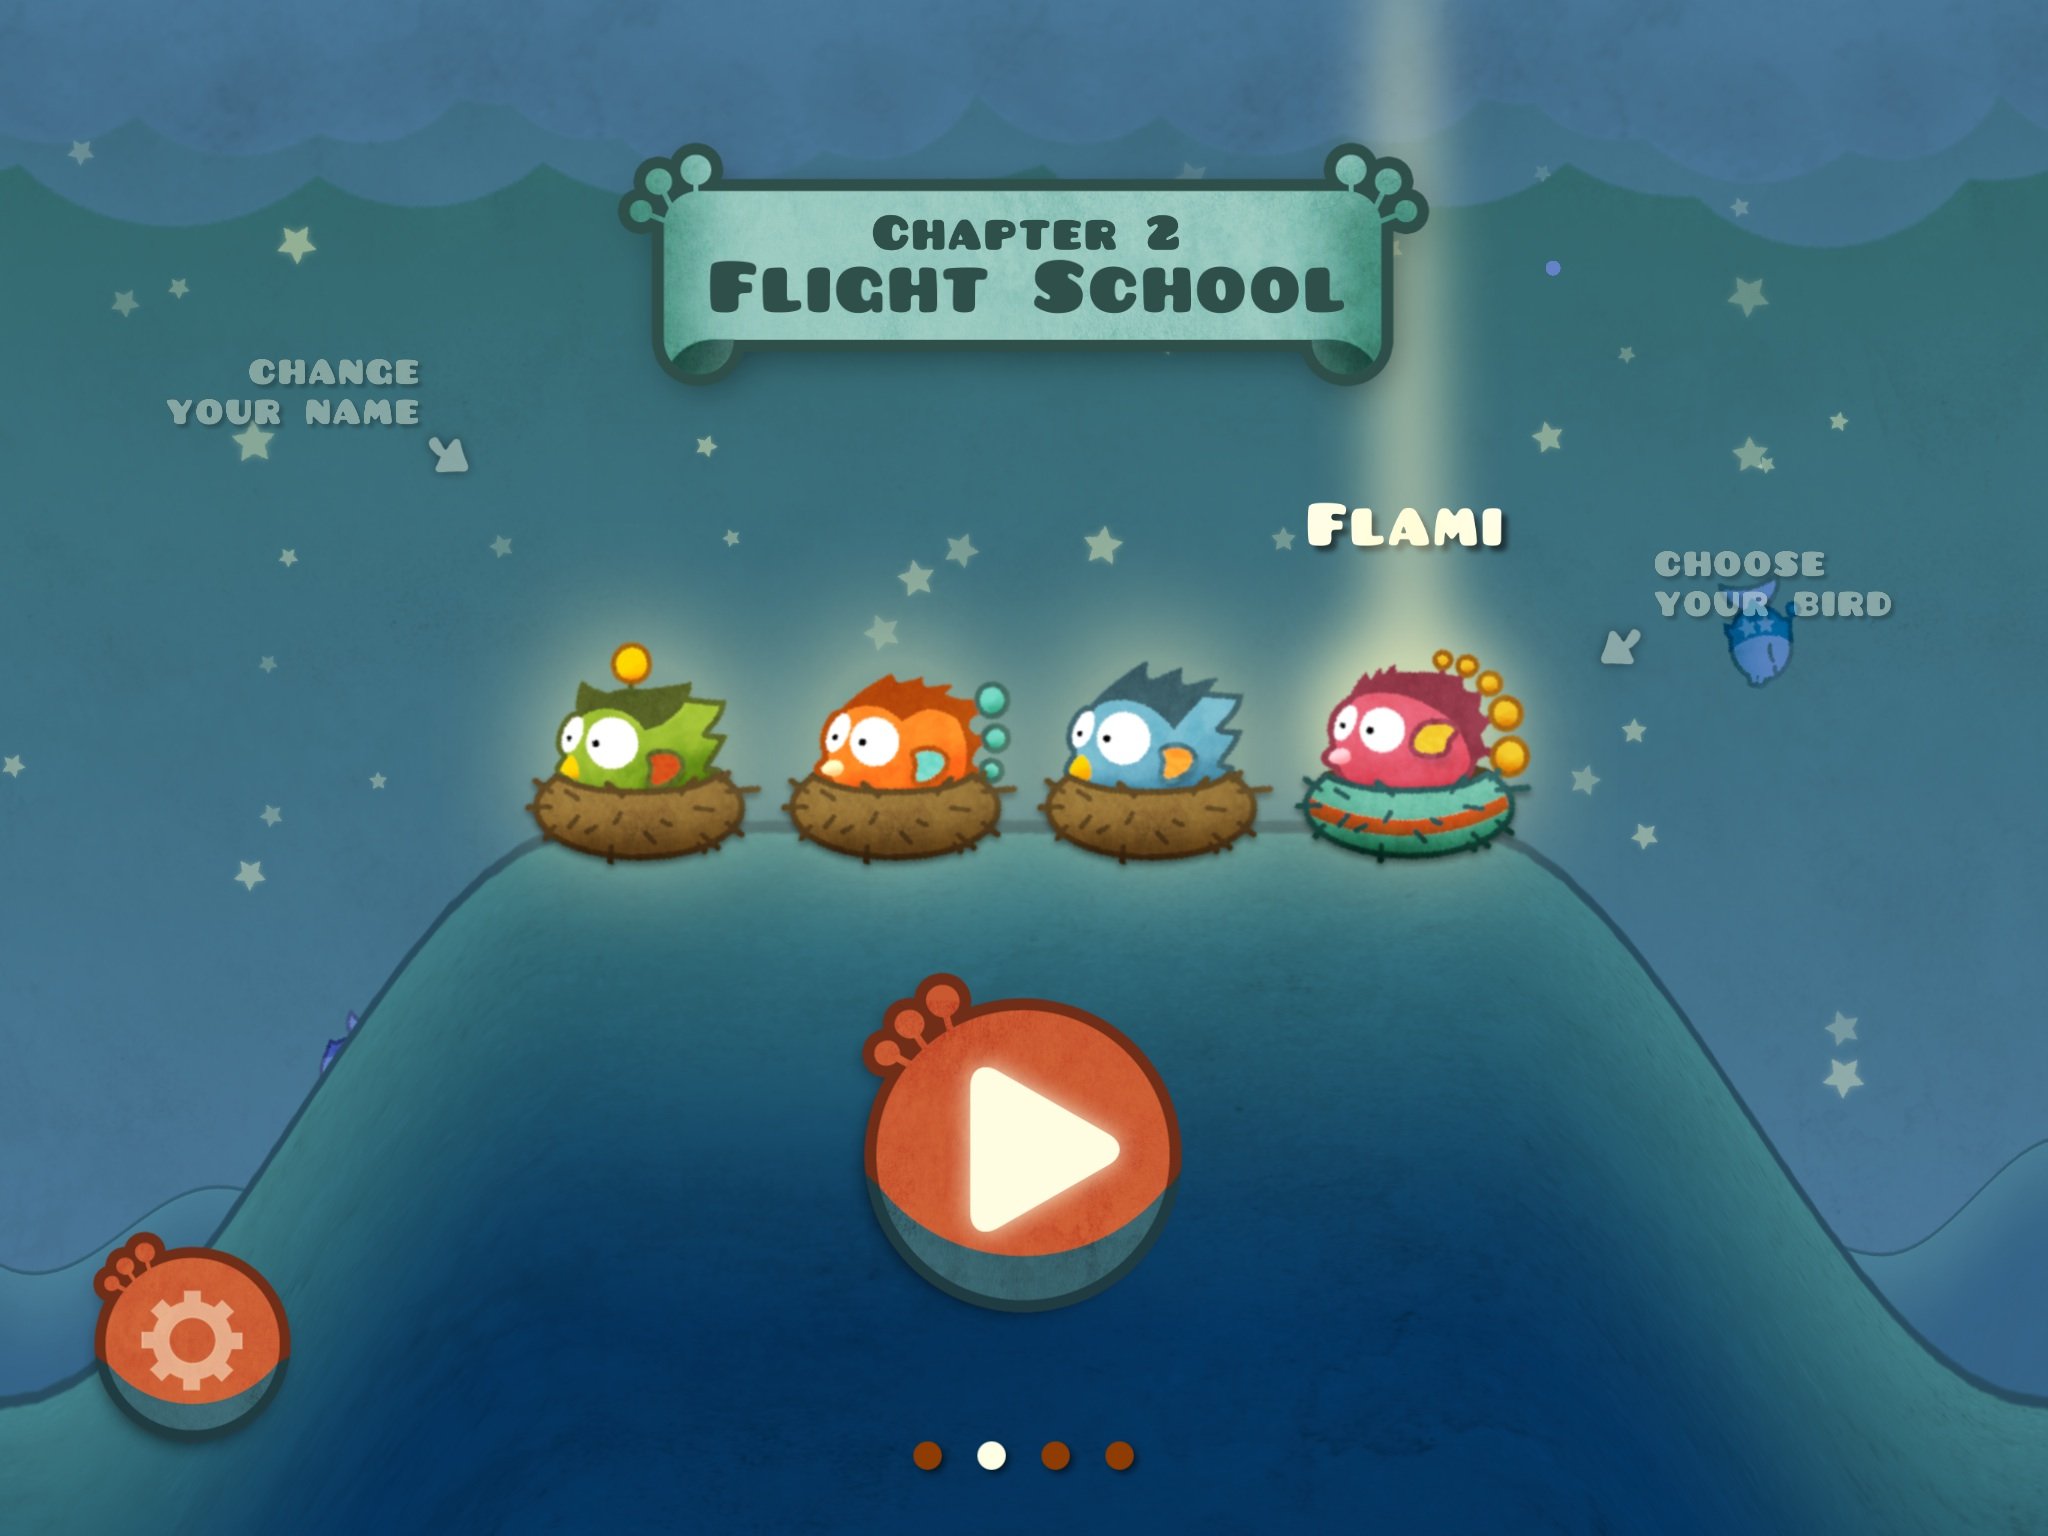 Tiny Wings: Top 10 tips, tricks, and cheats to help you fly higher and nest up faster!